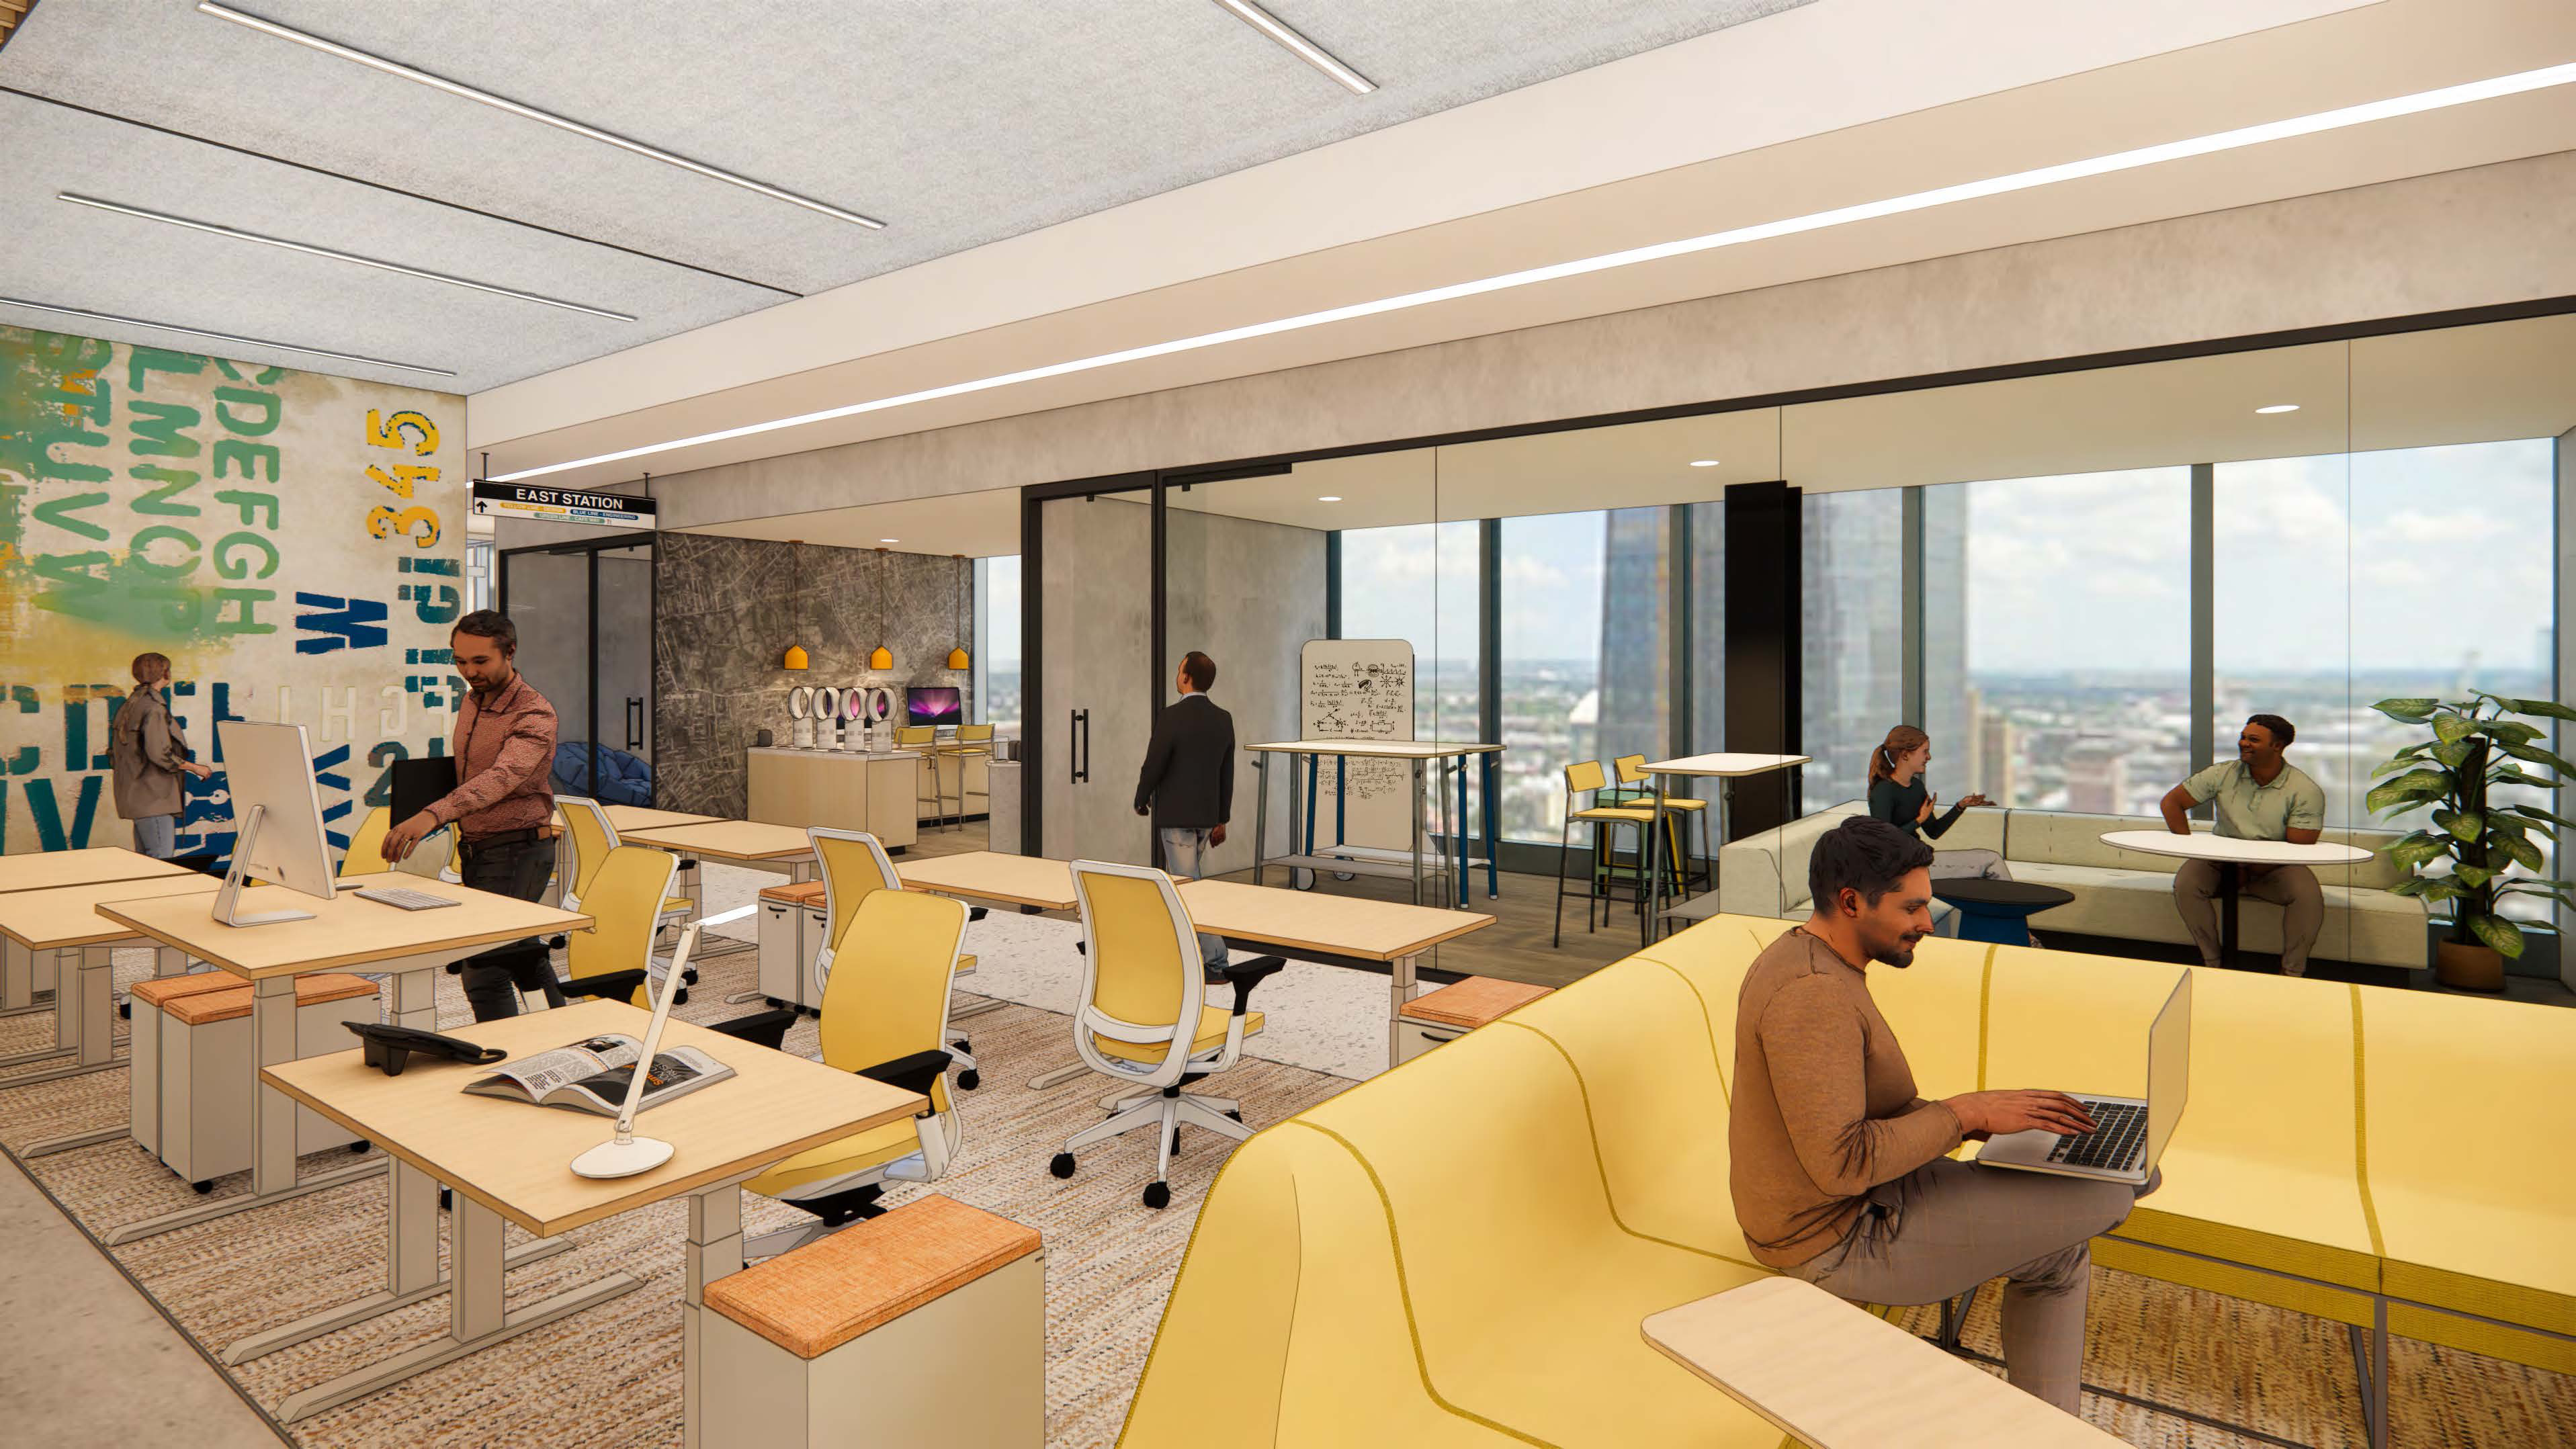 NEXT Robotics view of open office area with desks and collaborative seating